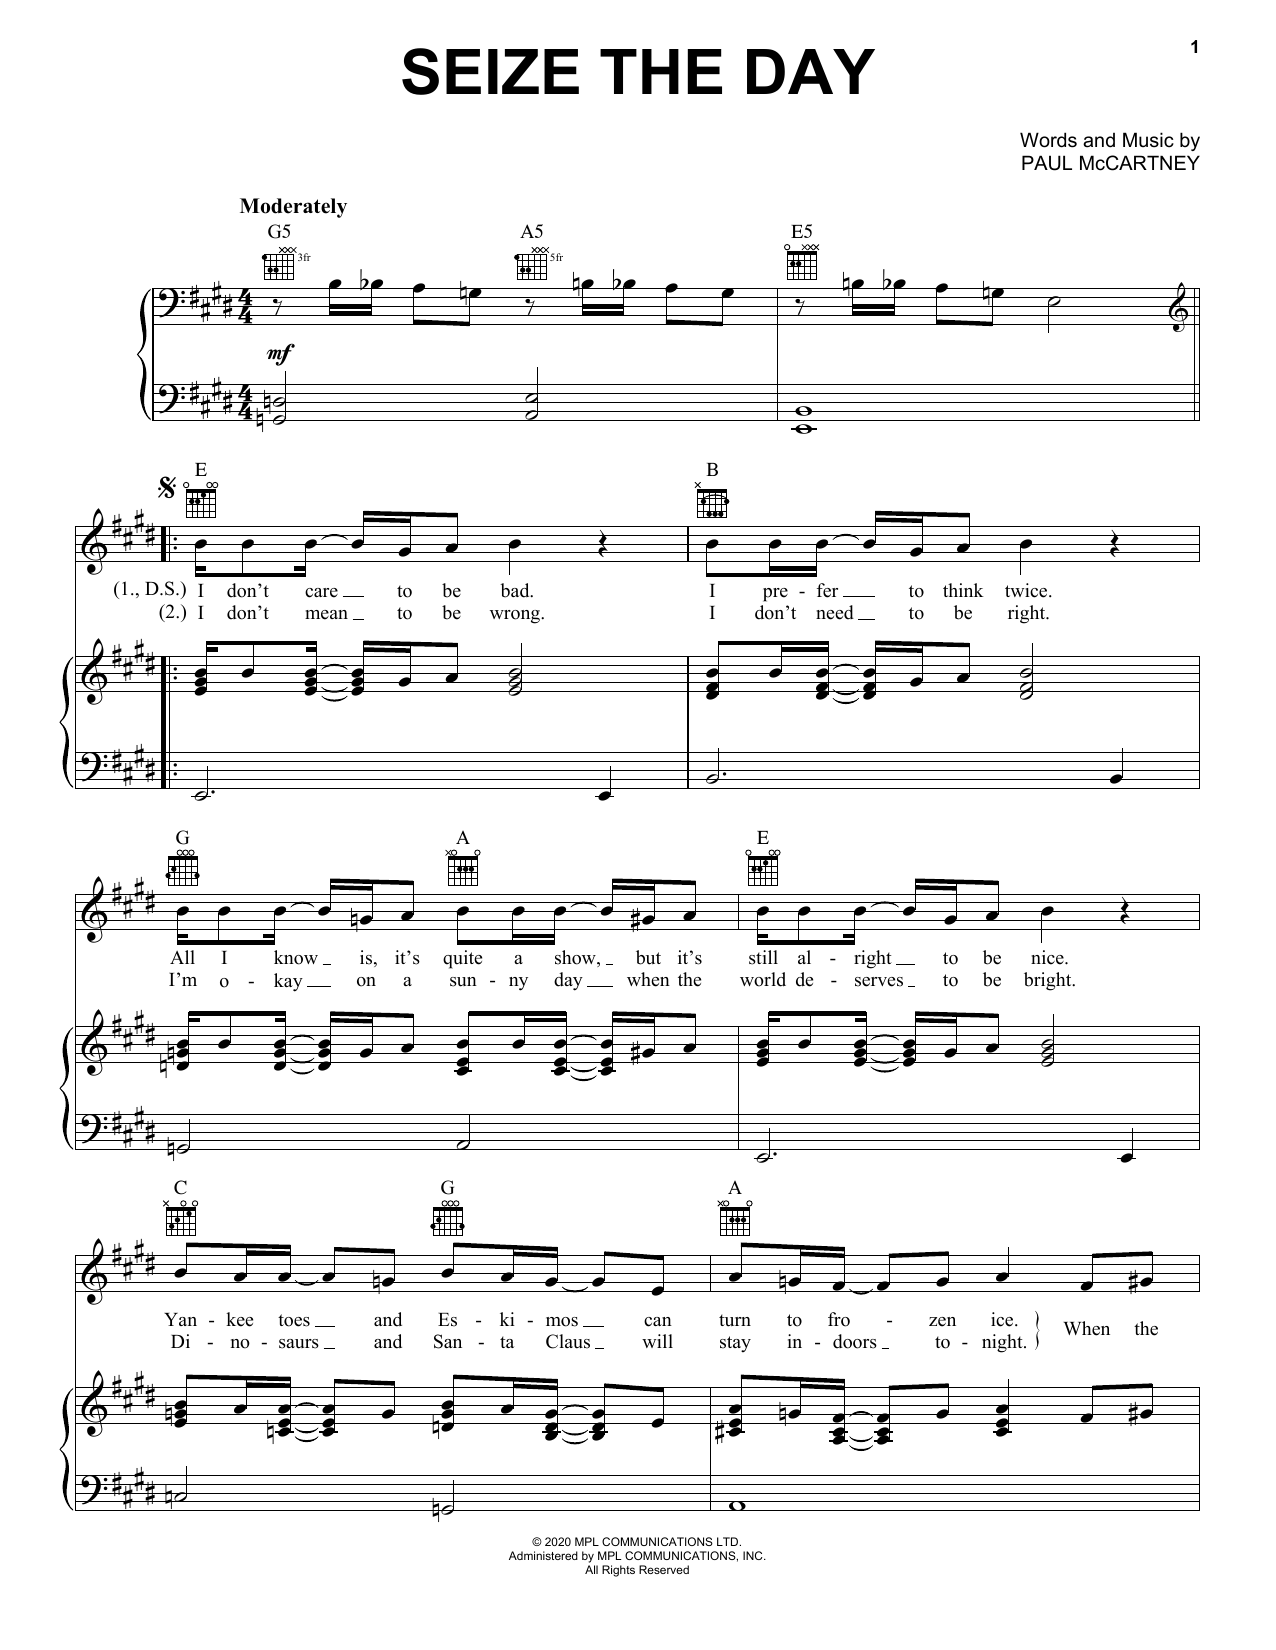 Download Paul McCartney Seize The Day Sheet Music